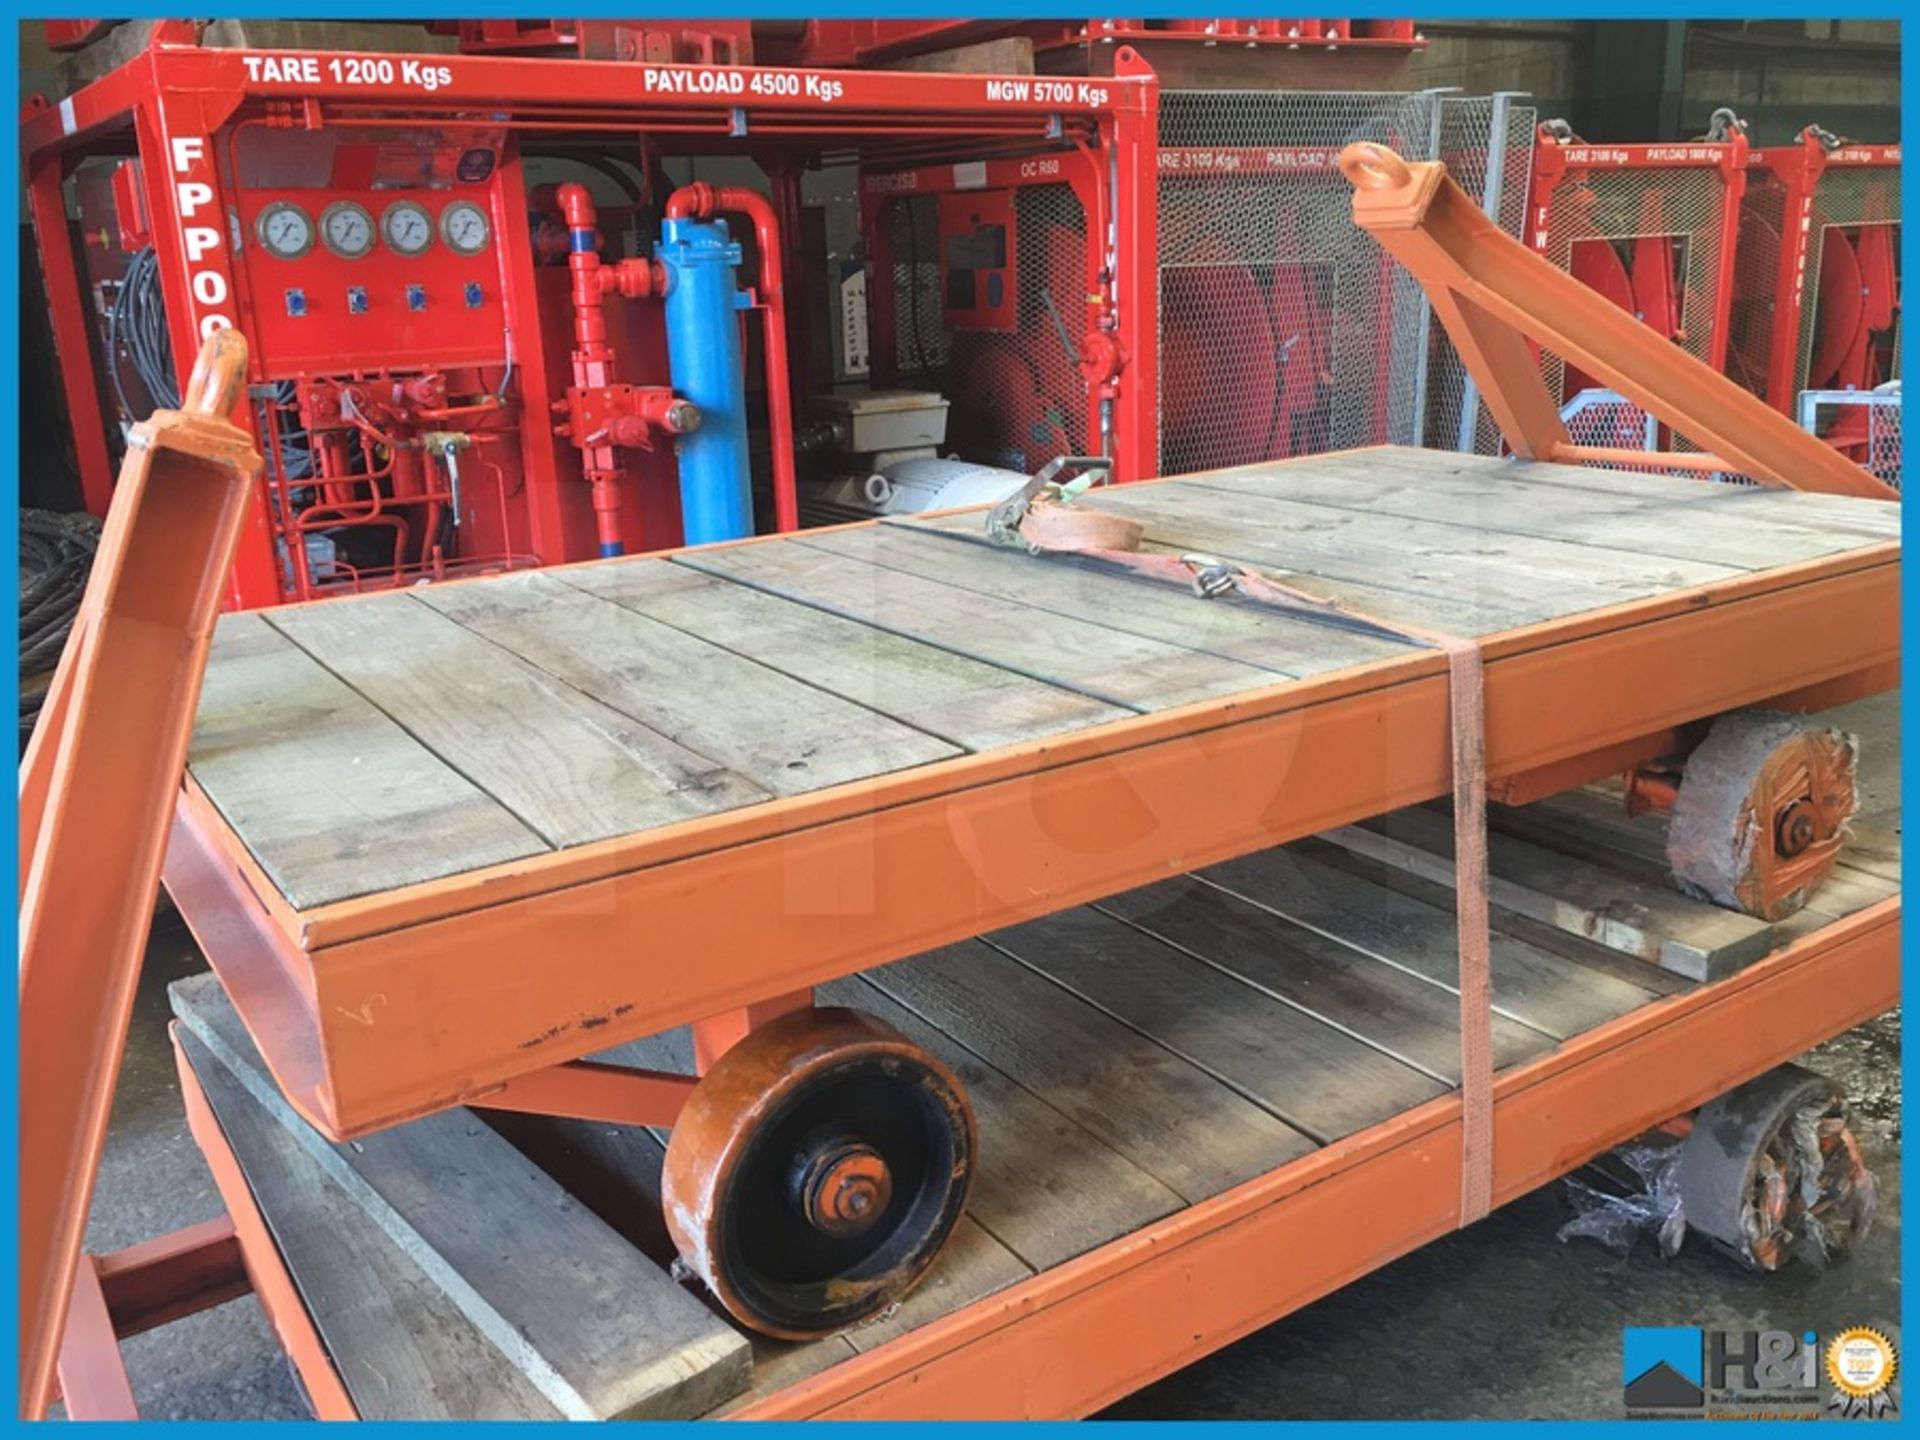 Unused wheeled trolley bogey with steerable axle and urethane wheels. Timber decked, 10 tonne